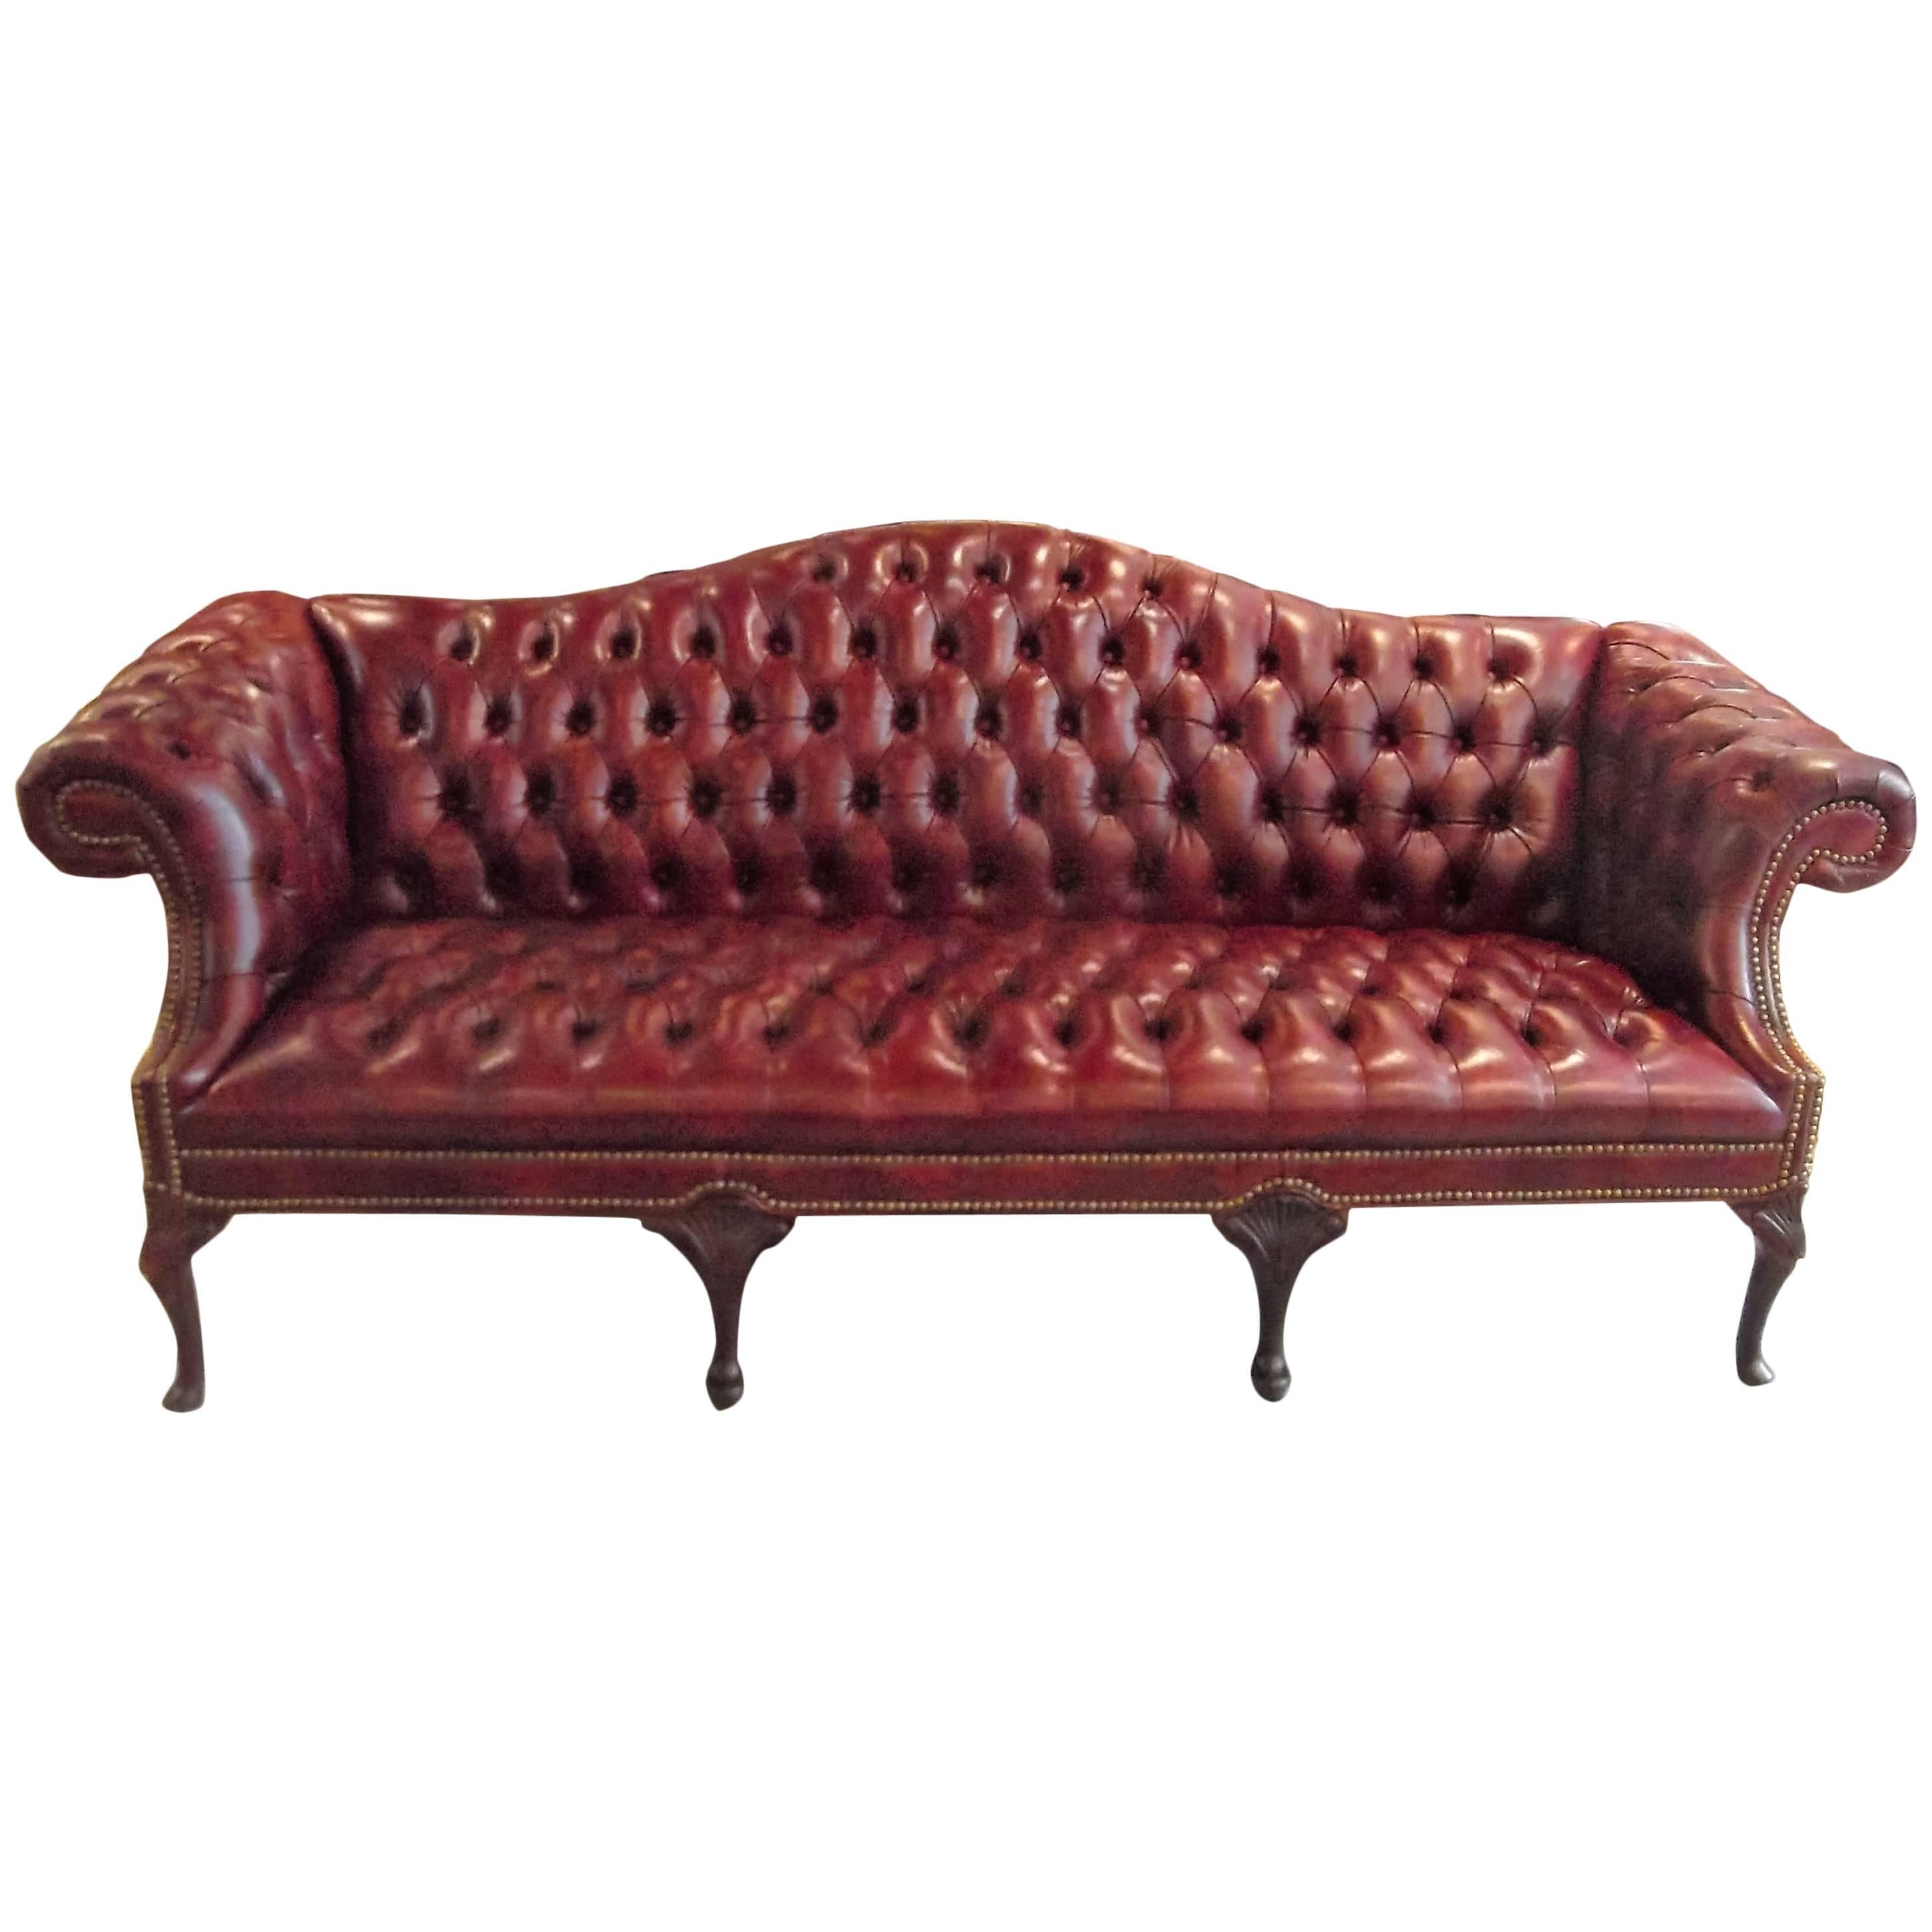 Handsome Chesterfield Camelback Leather Sofa